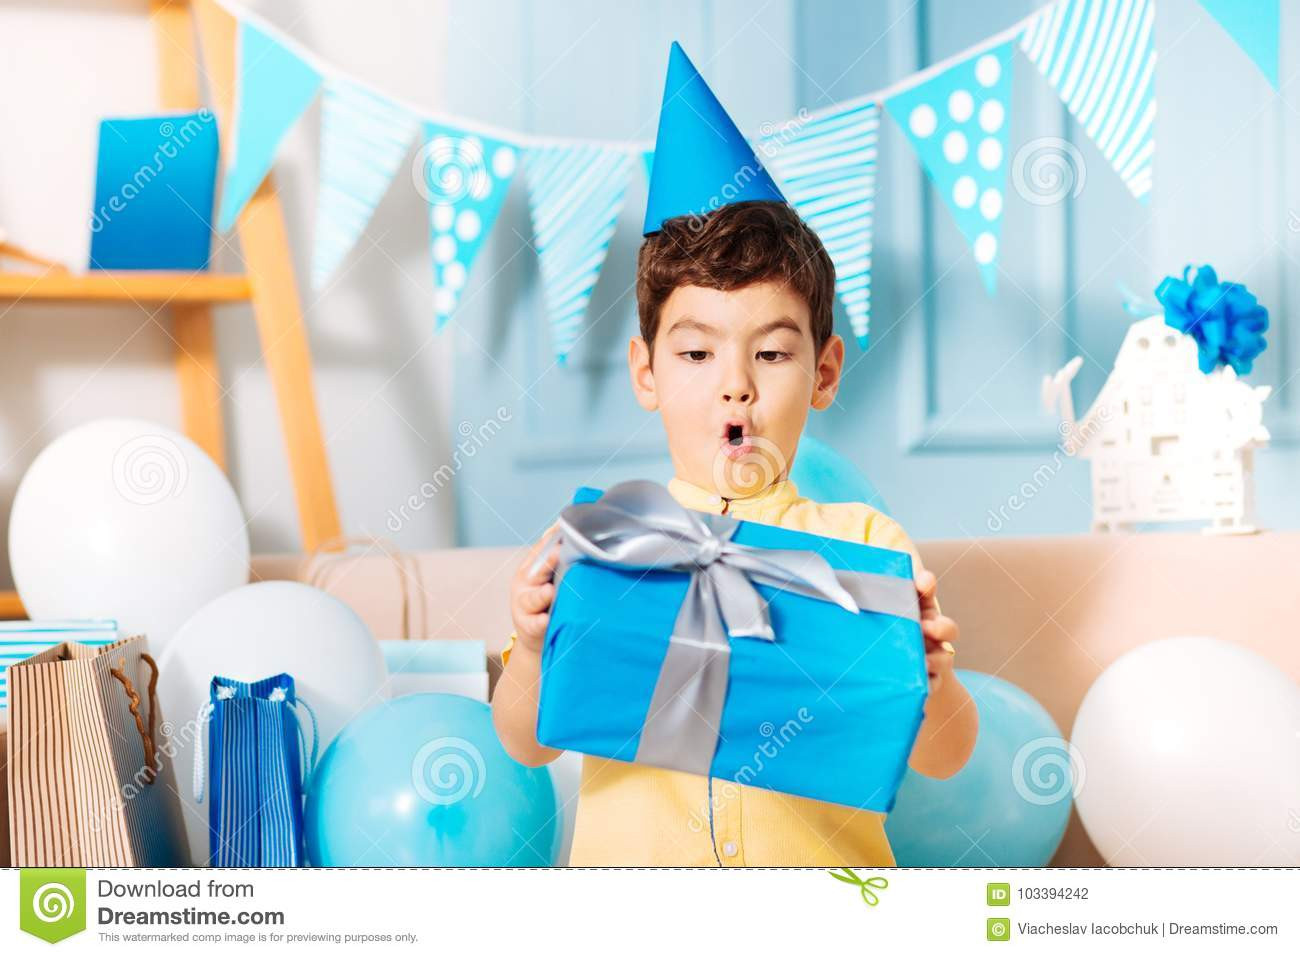 little-boy-looking-his-birthday-gift-surprise-incredible-adorable-holding-blue-box-present-sur...jpg